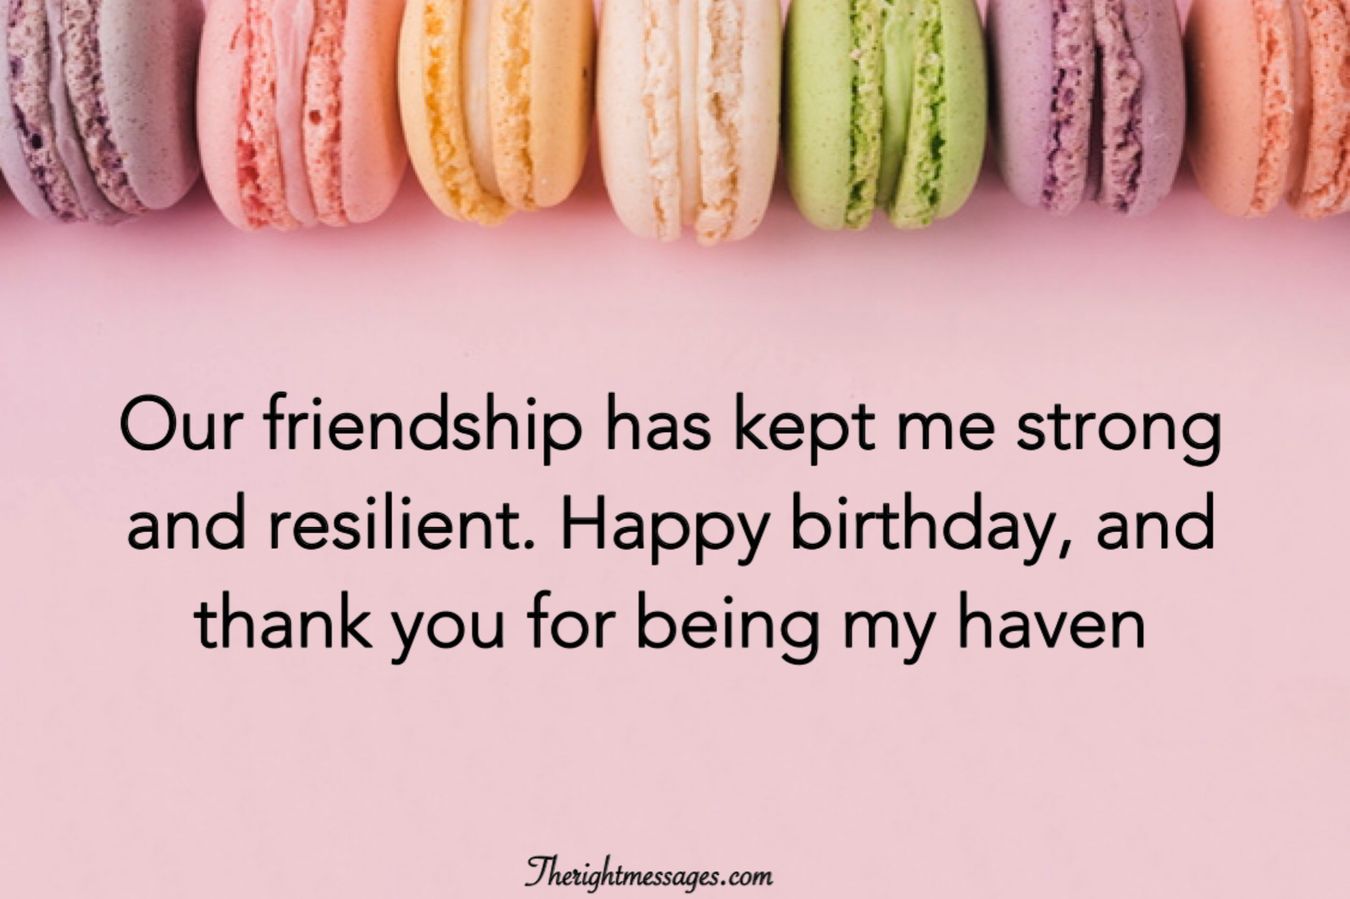 Short and Long Birthday Wishes for Best Friend - The Right Messages